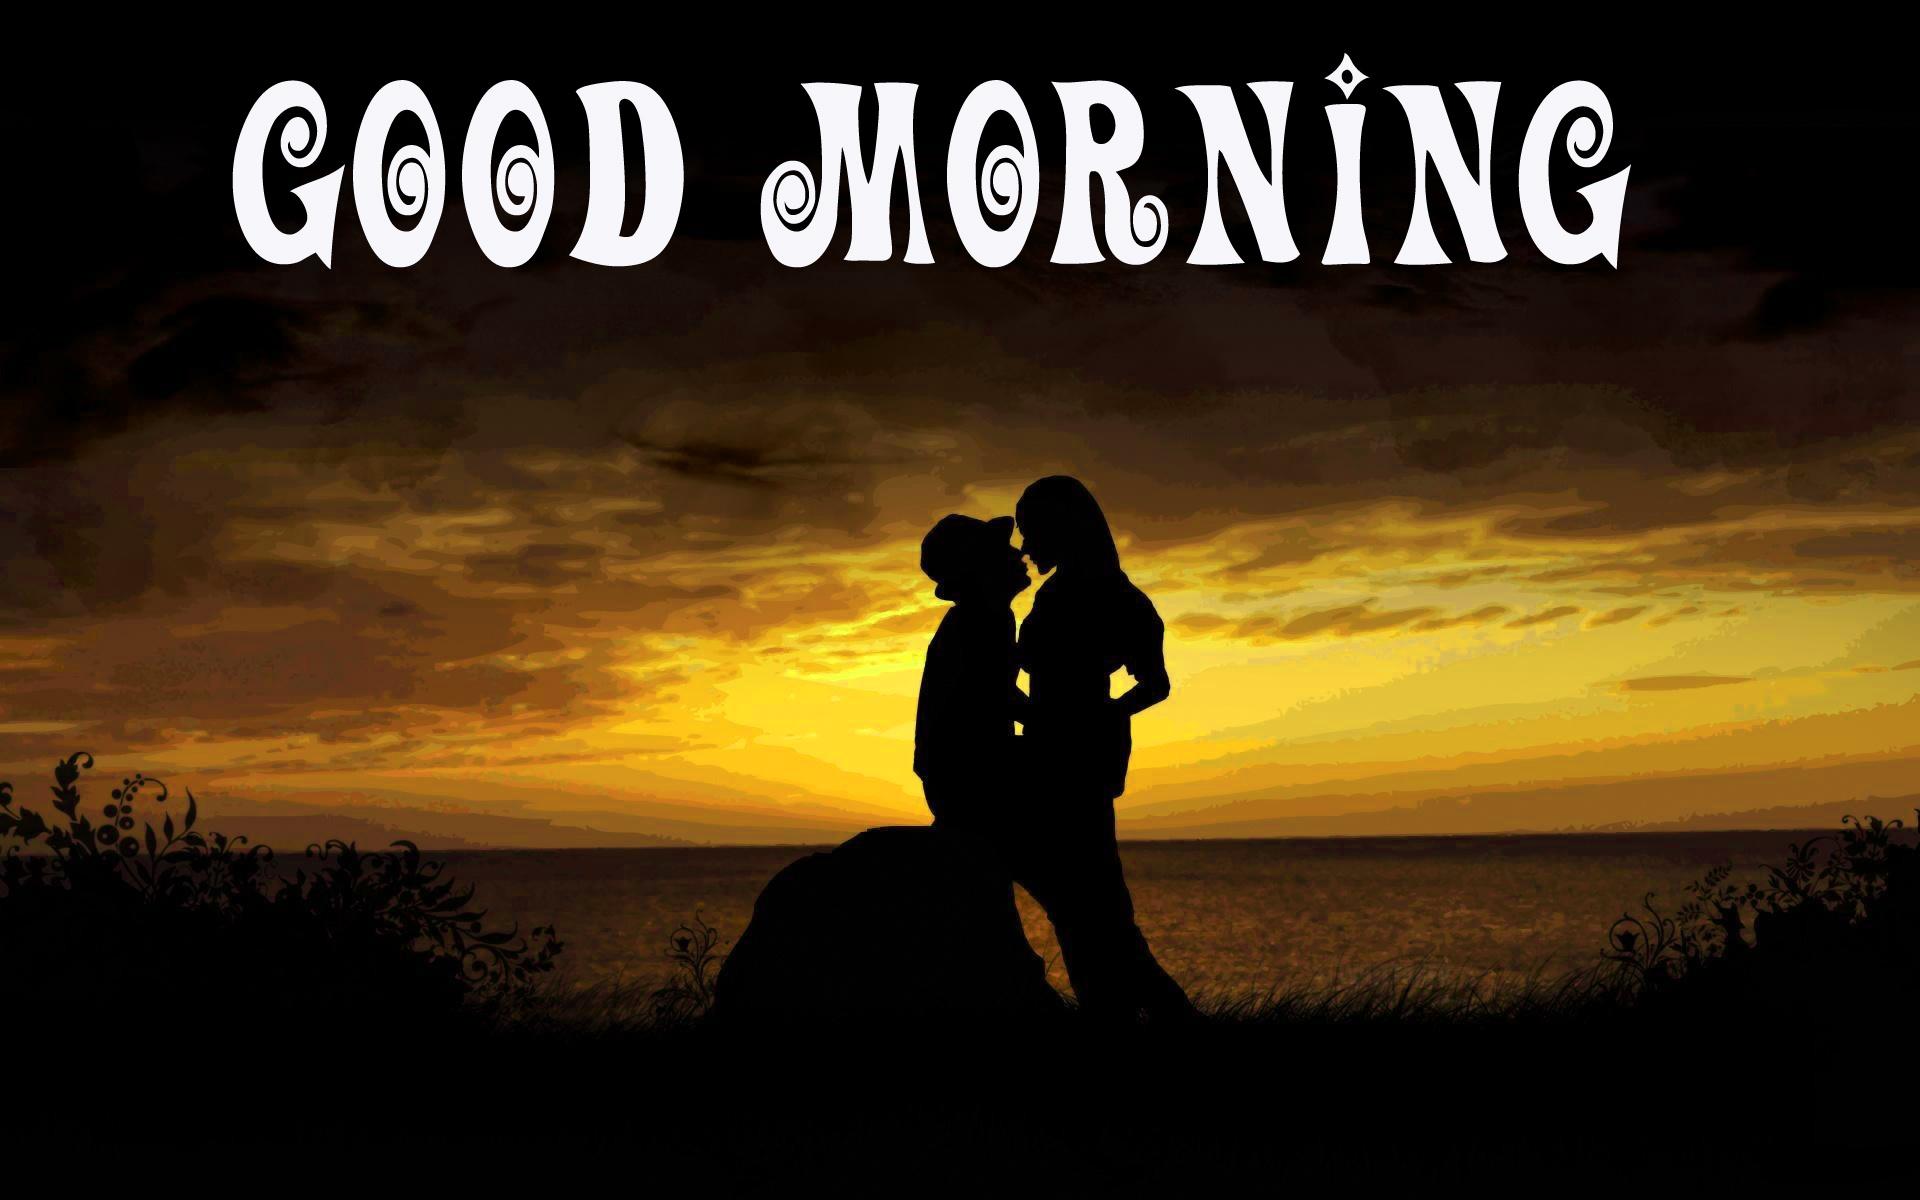 Romantic Good Morning Image Wallpapers Download.